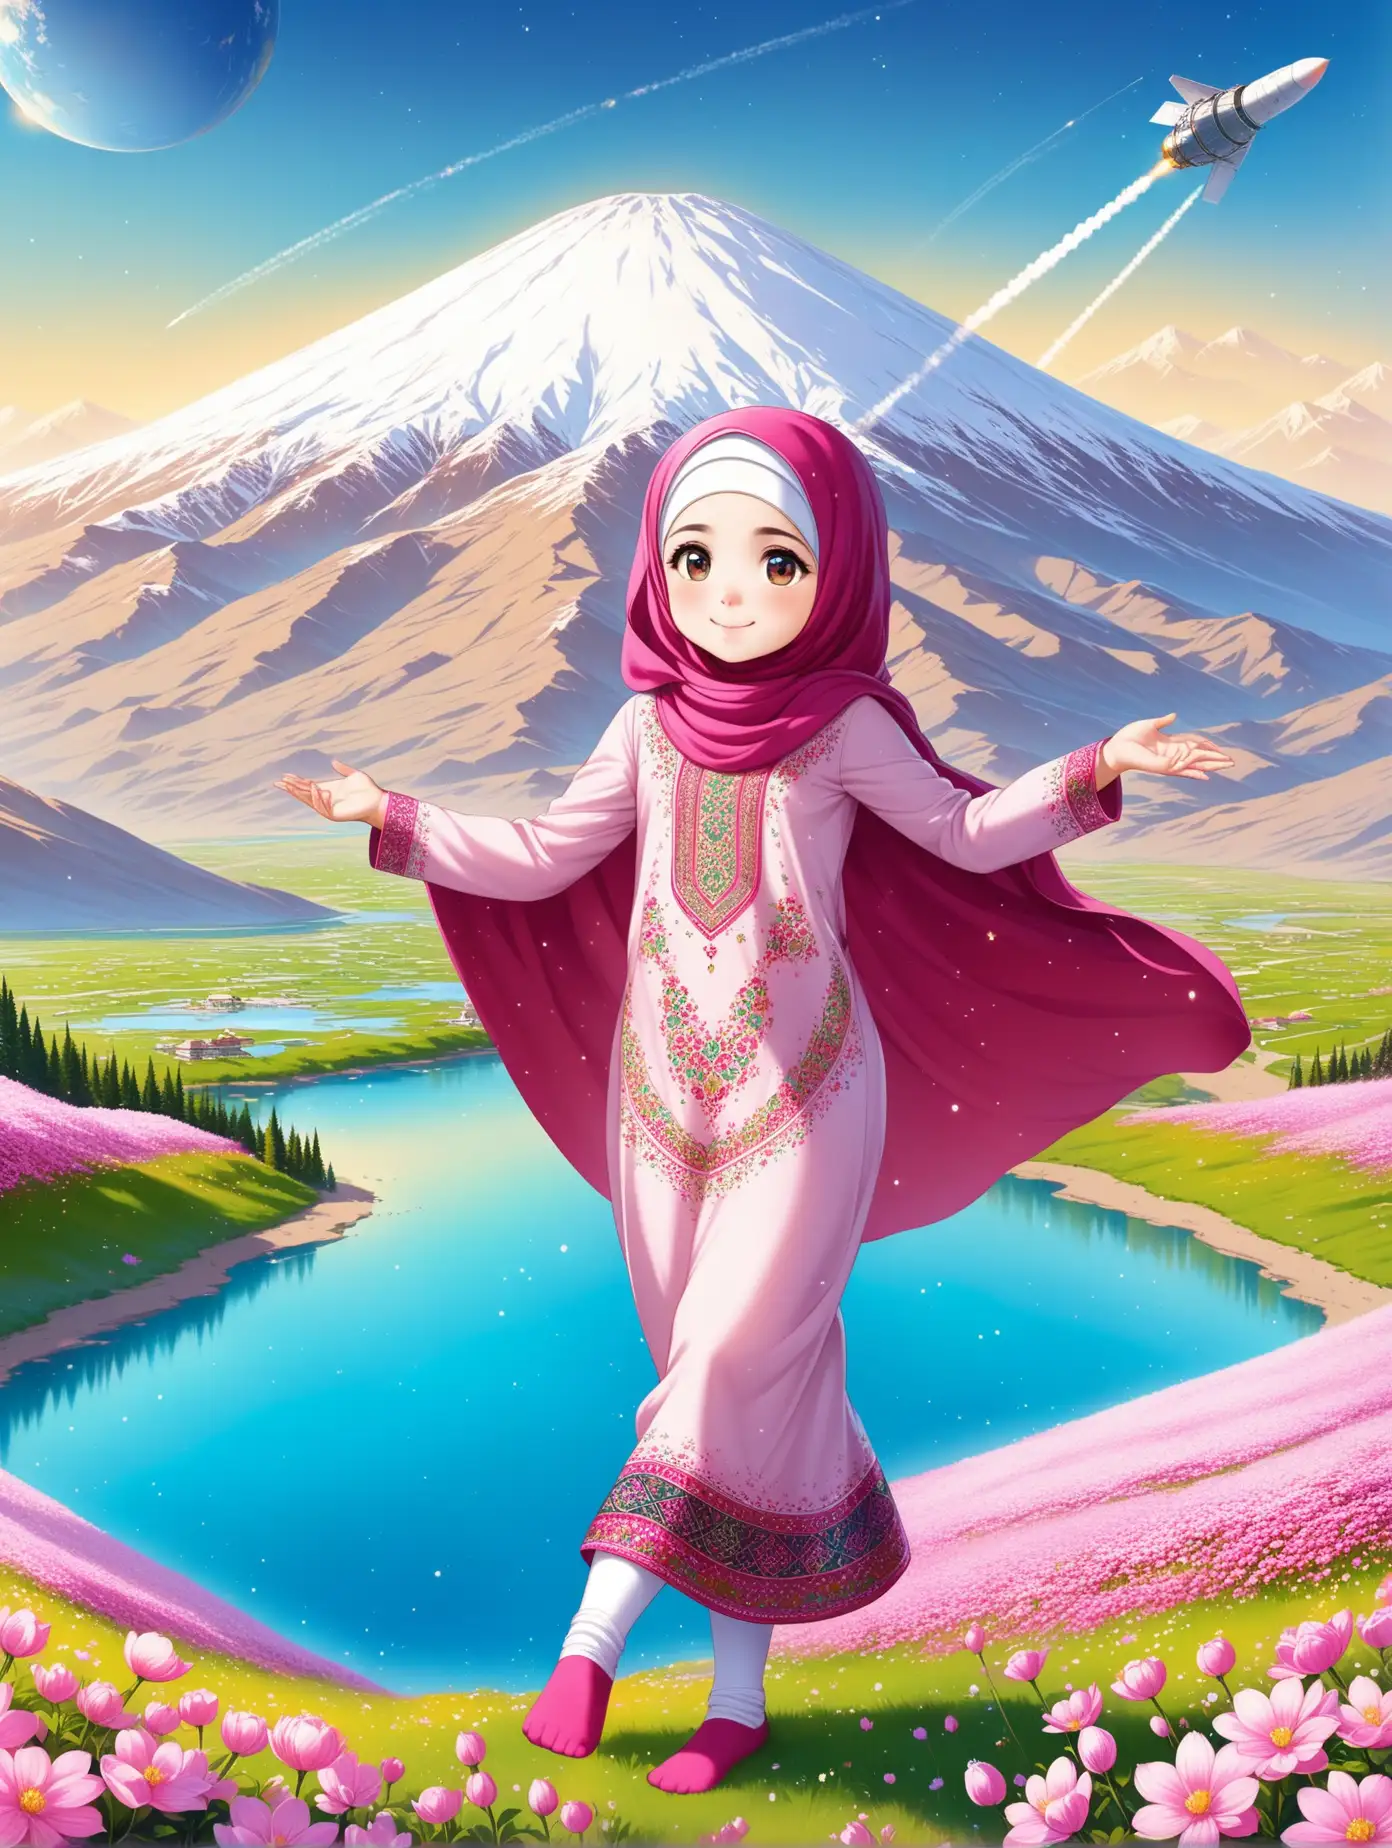 Persian little girl(full height, Muslim, with emphasis no hair nor neck out of veil(Hijab), small eyes, bigger nose, white skin, cute, smiling, wearing socks, clothes full of Persian designs).
Atmosphere Damavand mountain, proudly, firing a super high-tech satellite carrier to sky, full of many pink flowers, lake, spring.